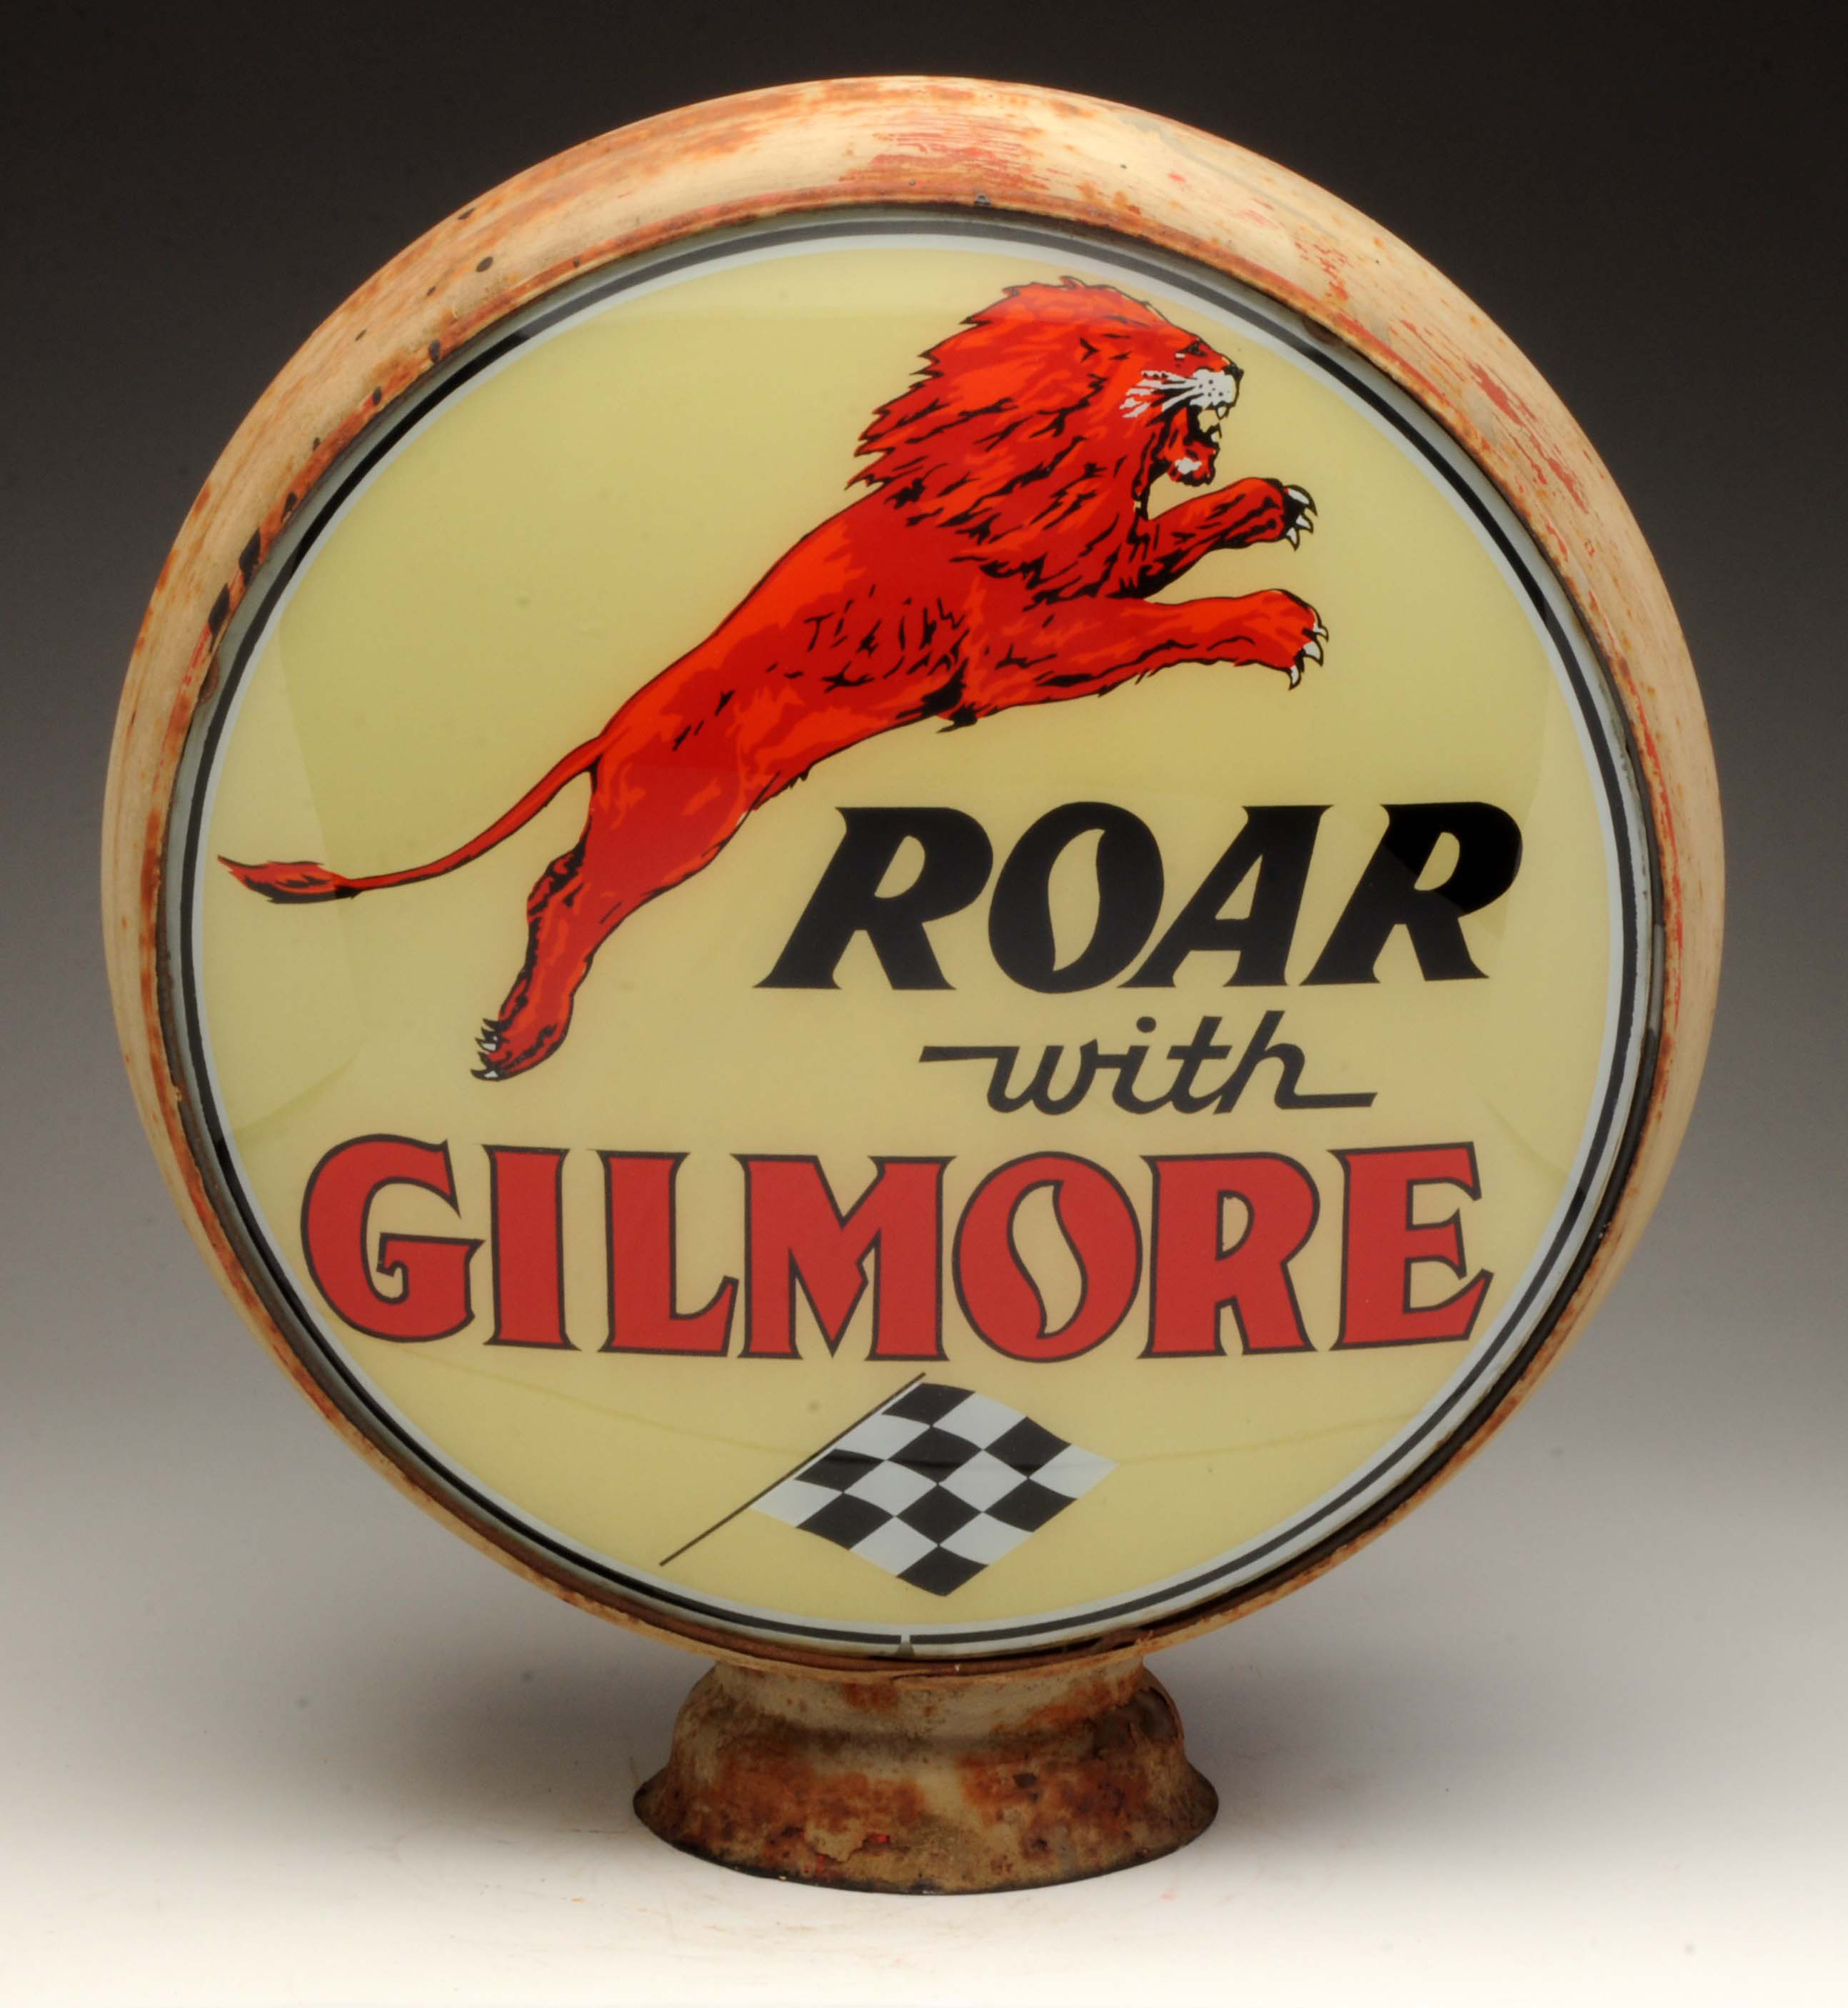 Lot #192	Roar with Gilmore Single Globe Lens, estimated at $8,000- $12,000.